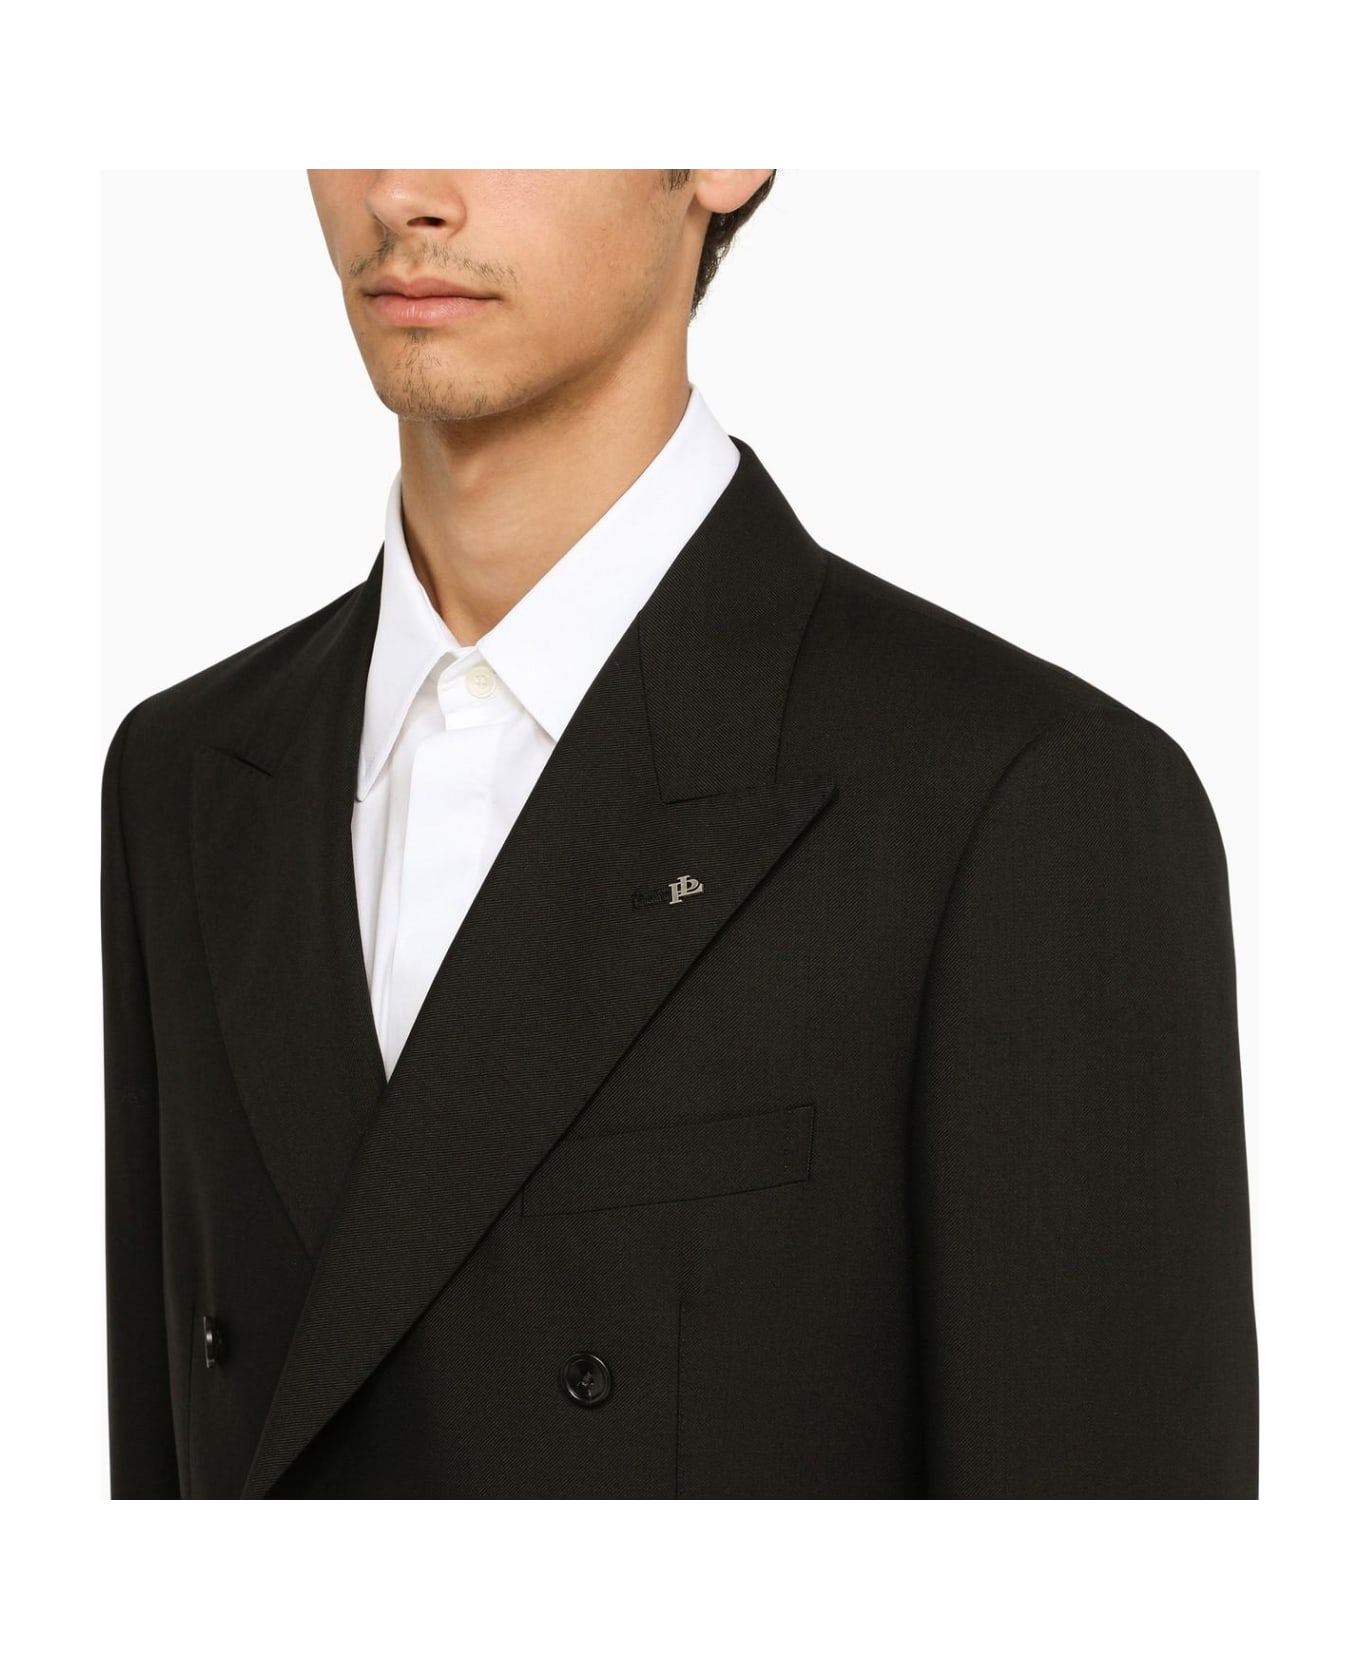 Tagliatore Black Double-breasted Suit In Wool - Nero スーツ